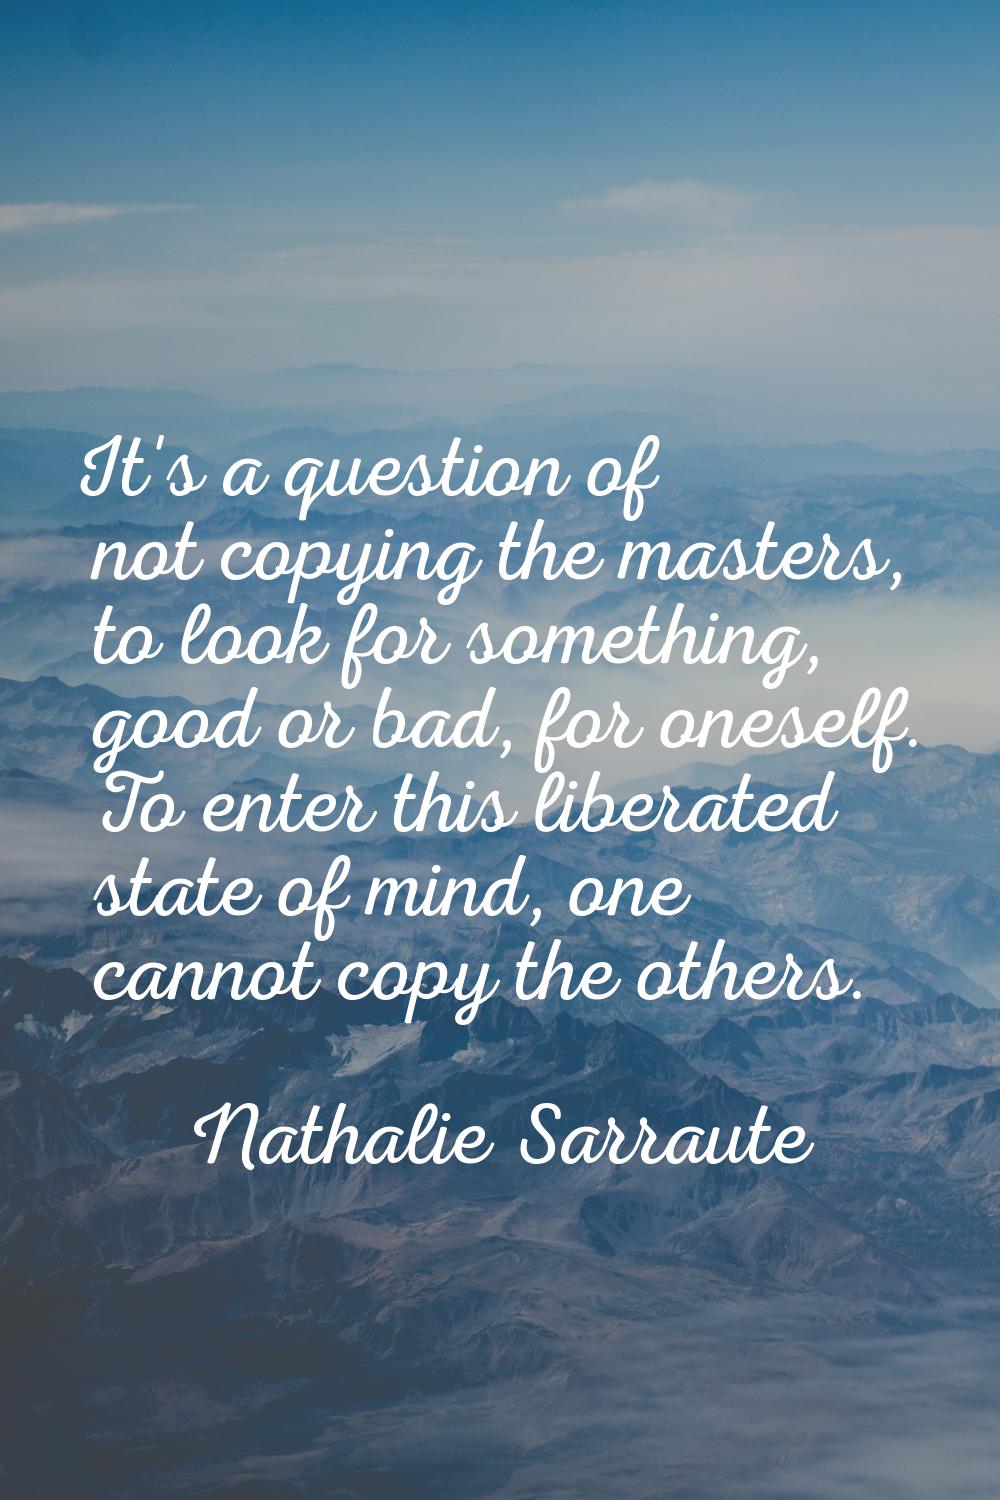 It's a question of not copying the masters, to look for something, good or bad, for oneself. To ent